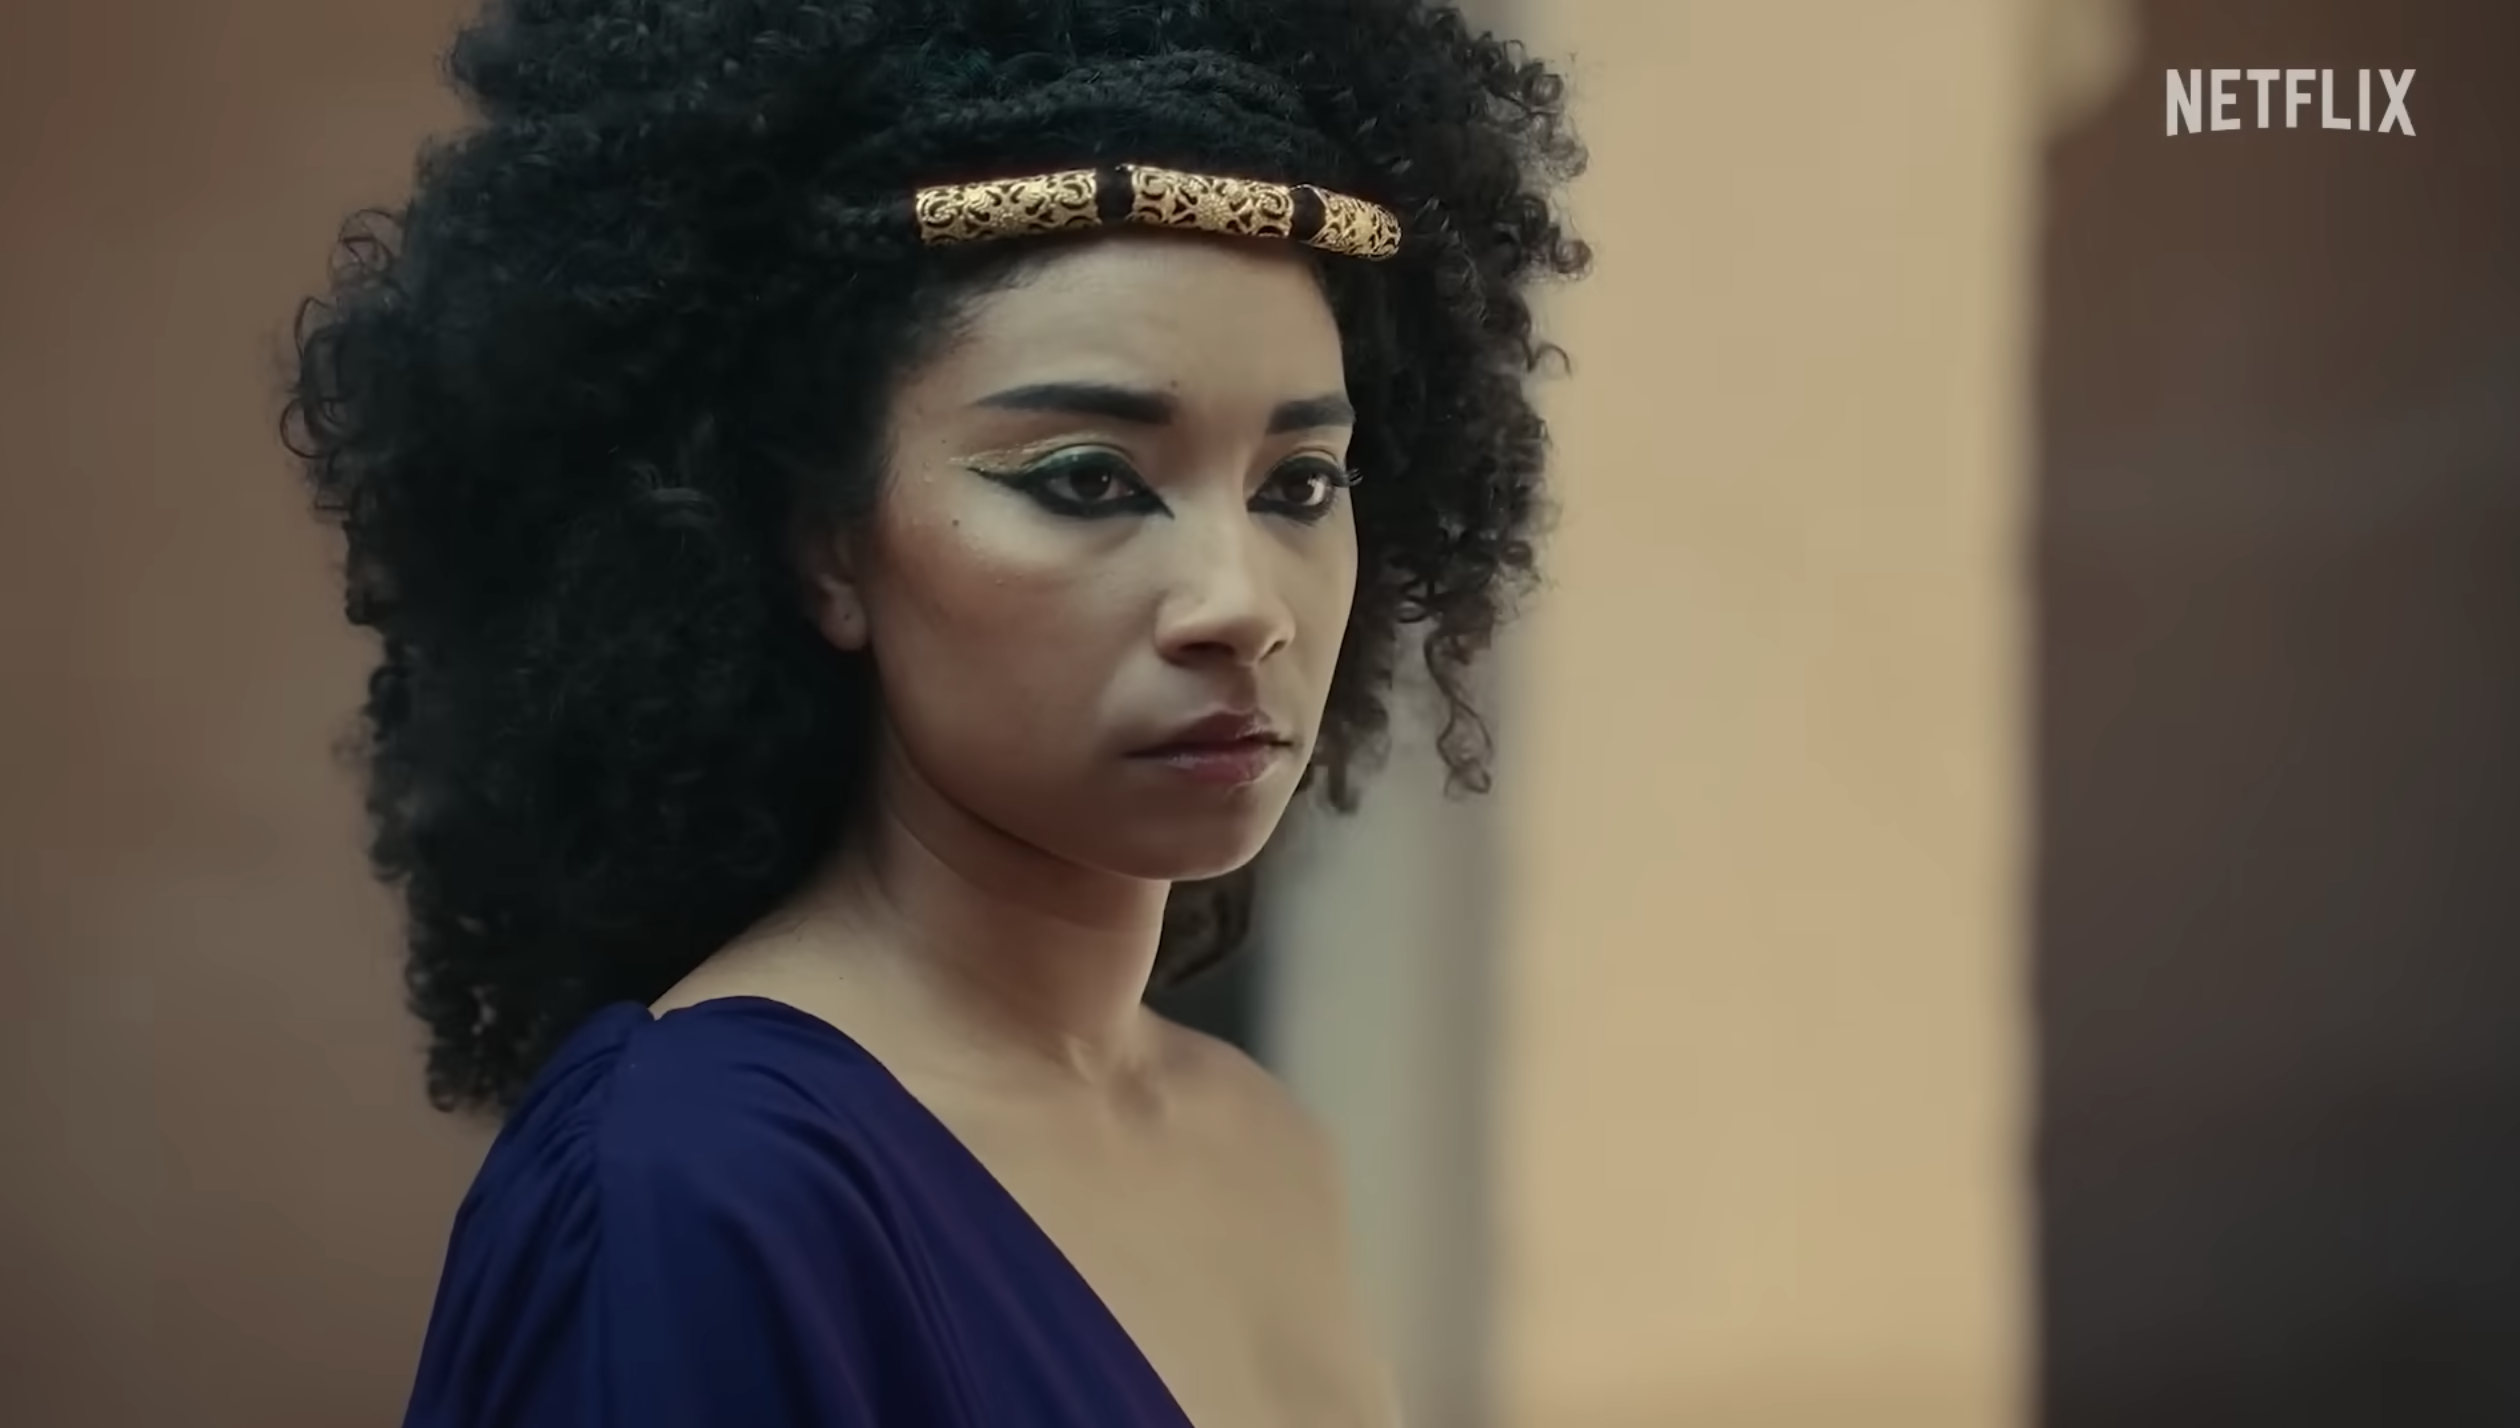 Why is Netflix pretending that Cleopatra was black?